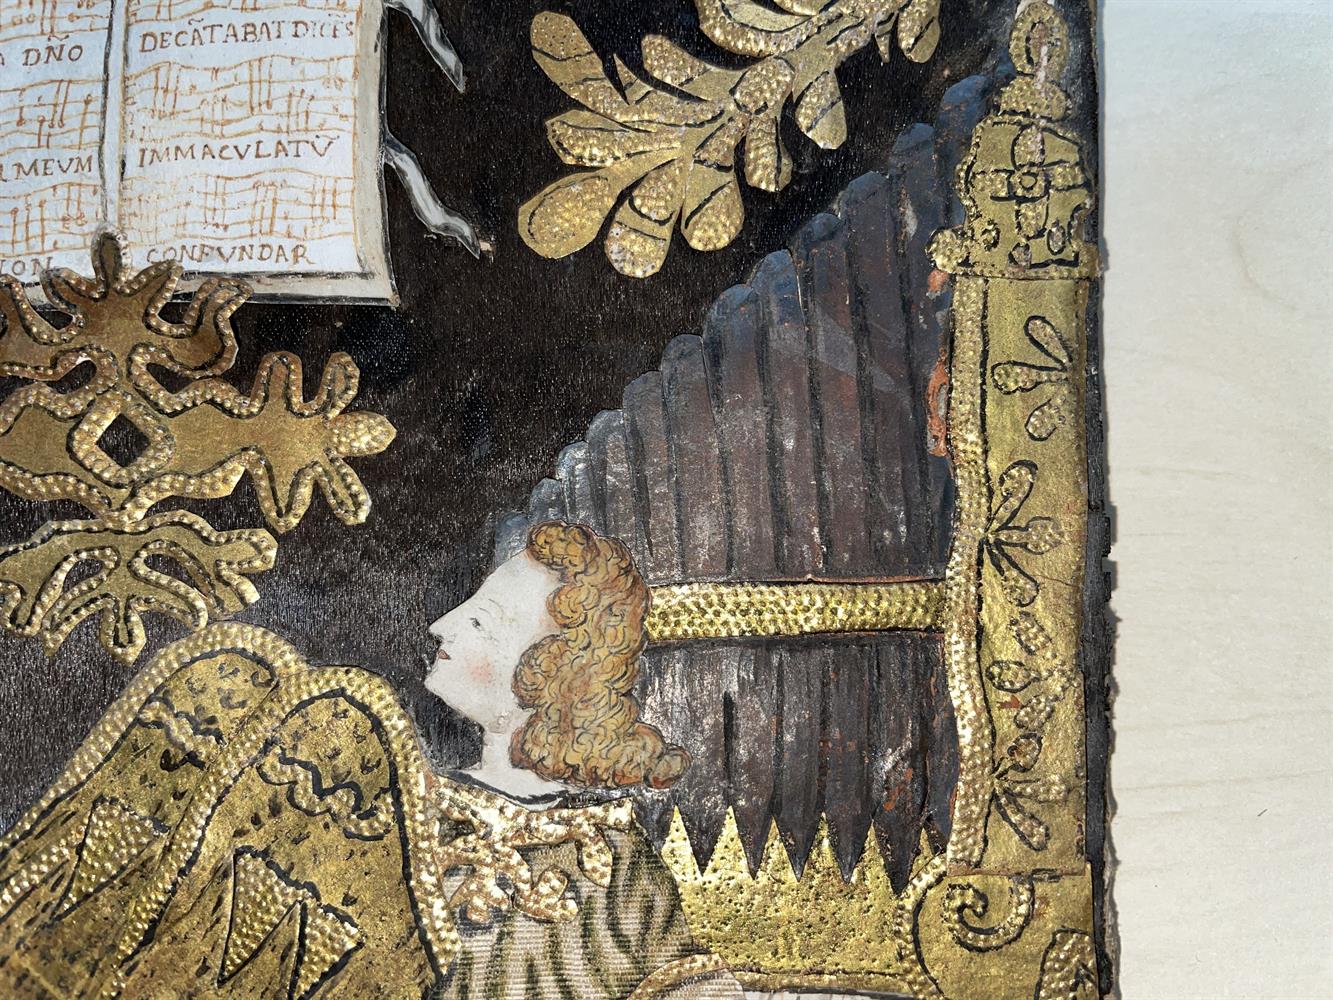 A RARE TEXTILE AND NEEDLEWORK COLLAGE PICTURE DEPICTING SAINT CECILIA, LATE 16TH/EARLY 17TH CENTURY - Image 9 of 18